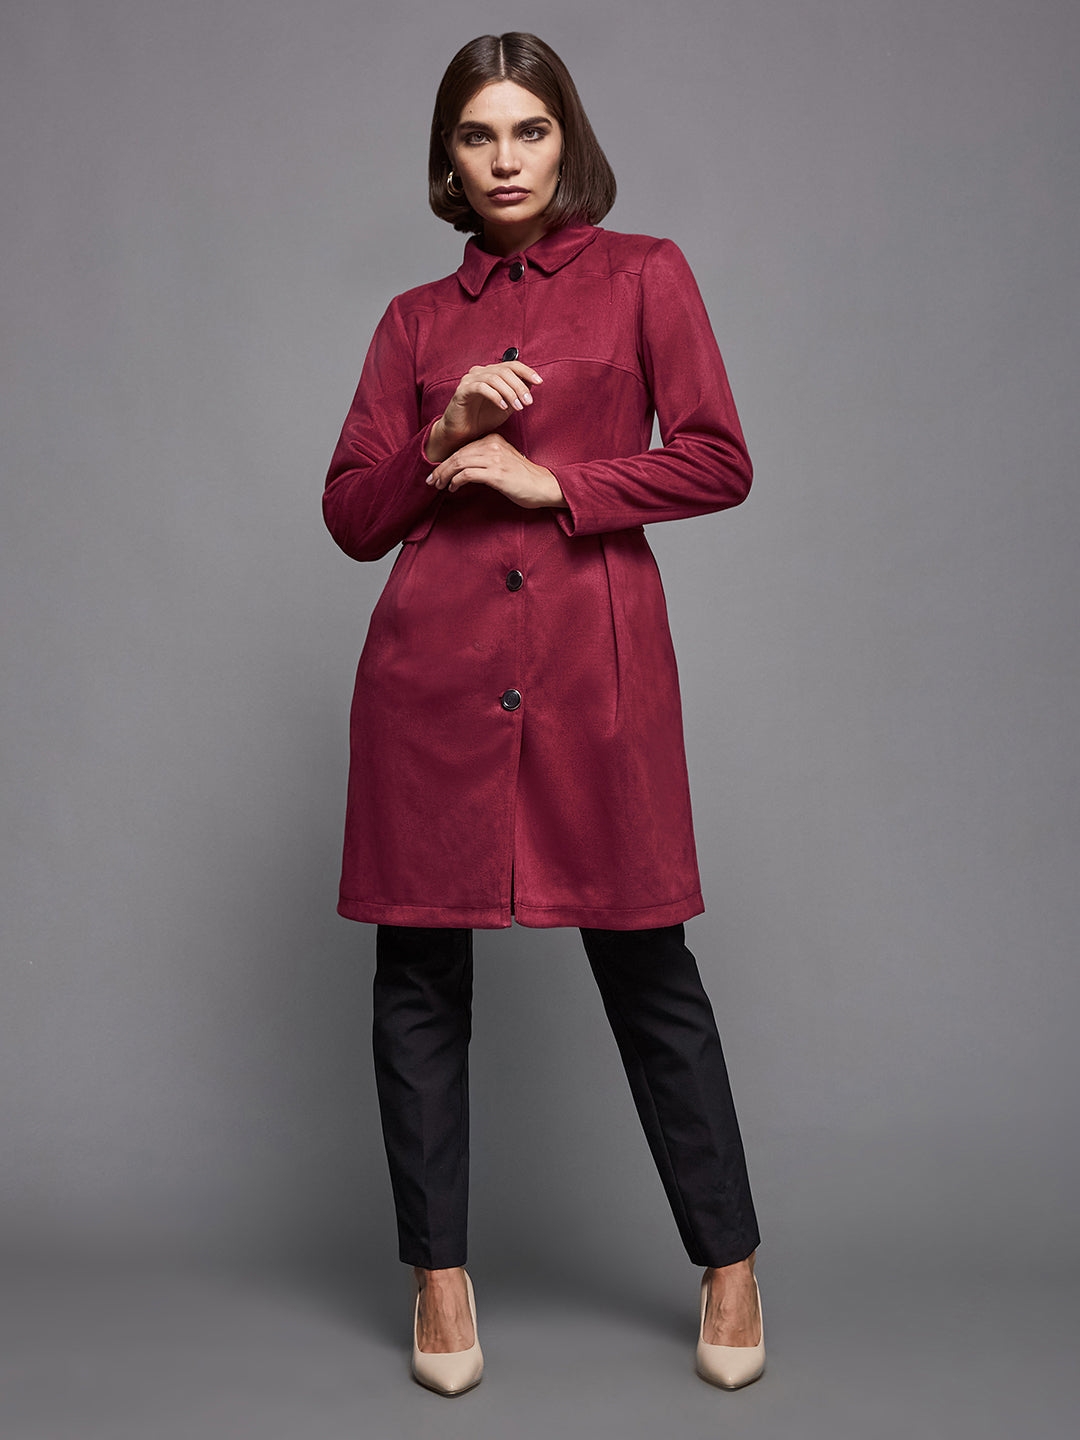 MISS CHASE | Dark Red Shirt Collar Full-Sleeve Solid Knee-Long Polyester Jacket